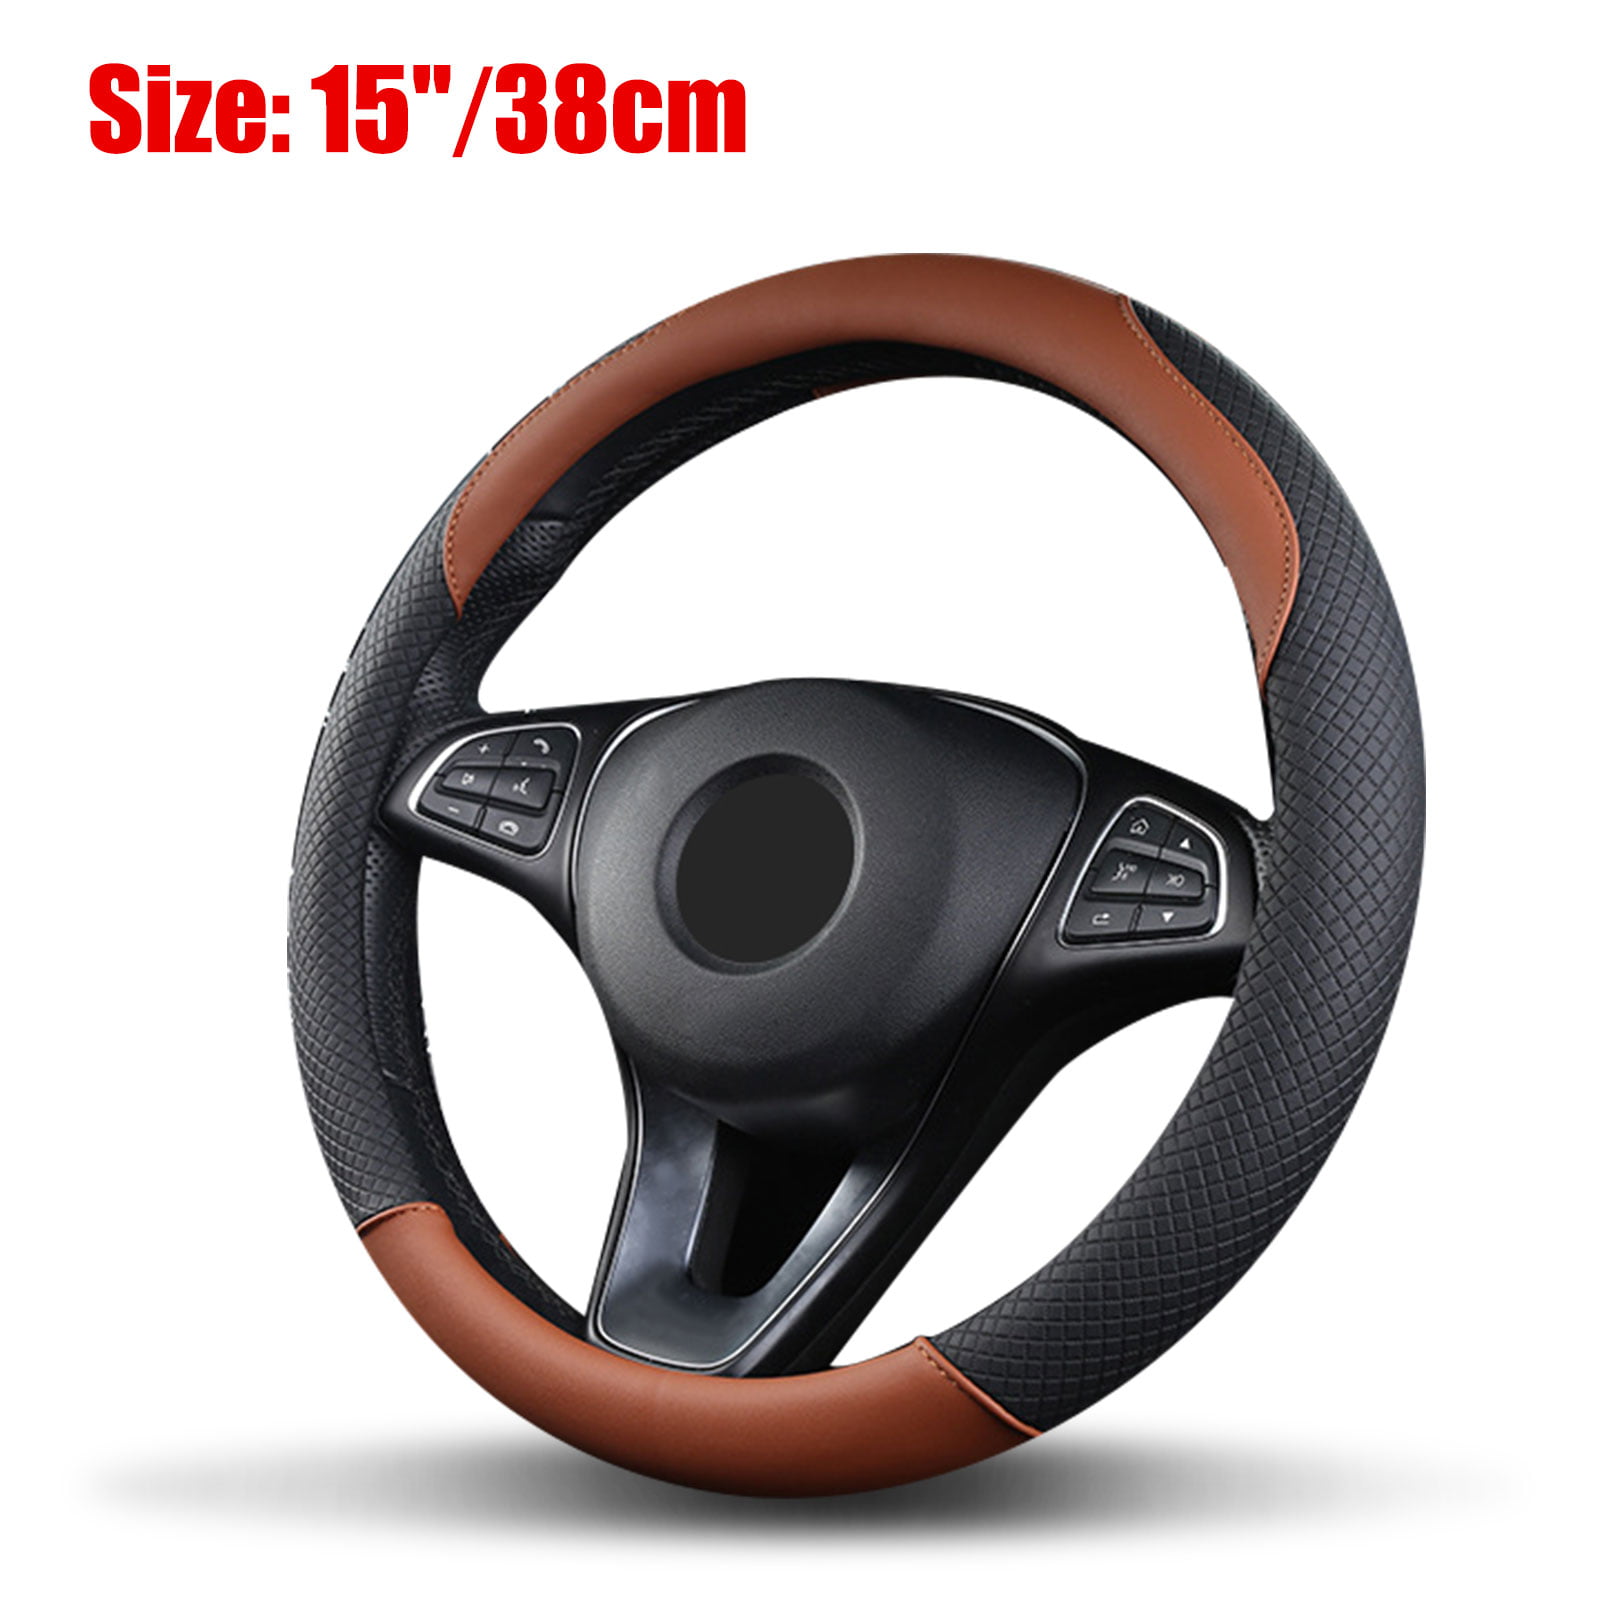 KMMORTOS Car Steering Wheel Cover Universal 15 inch Punching Leather Artificial CA